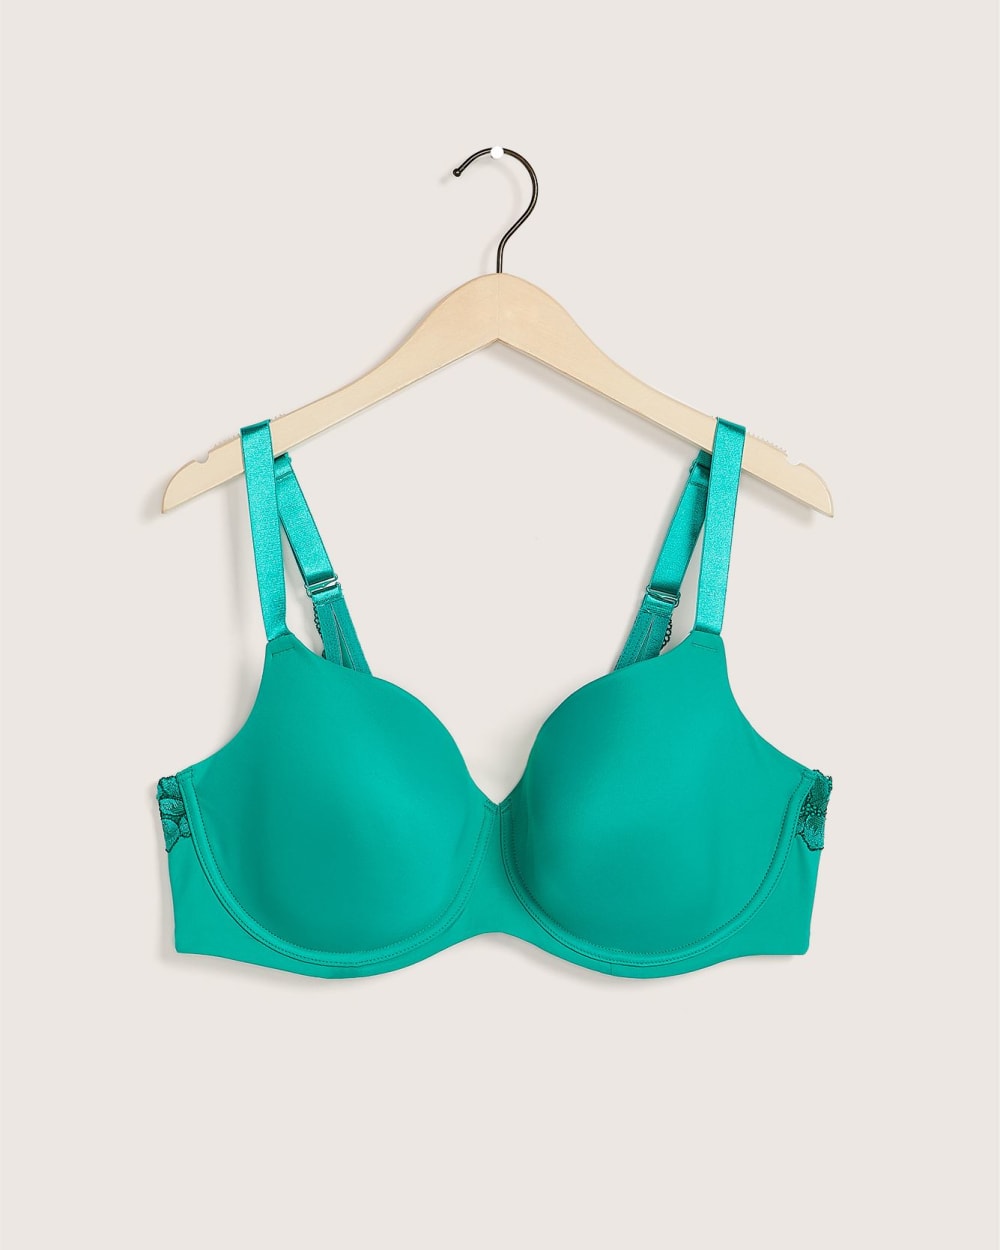 Underwire T-Shirt Bra with Lace Wings - tiVOGLIO